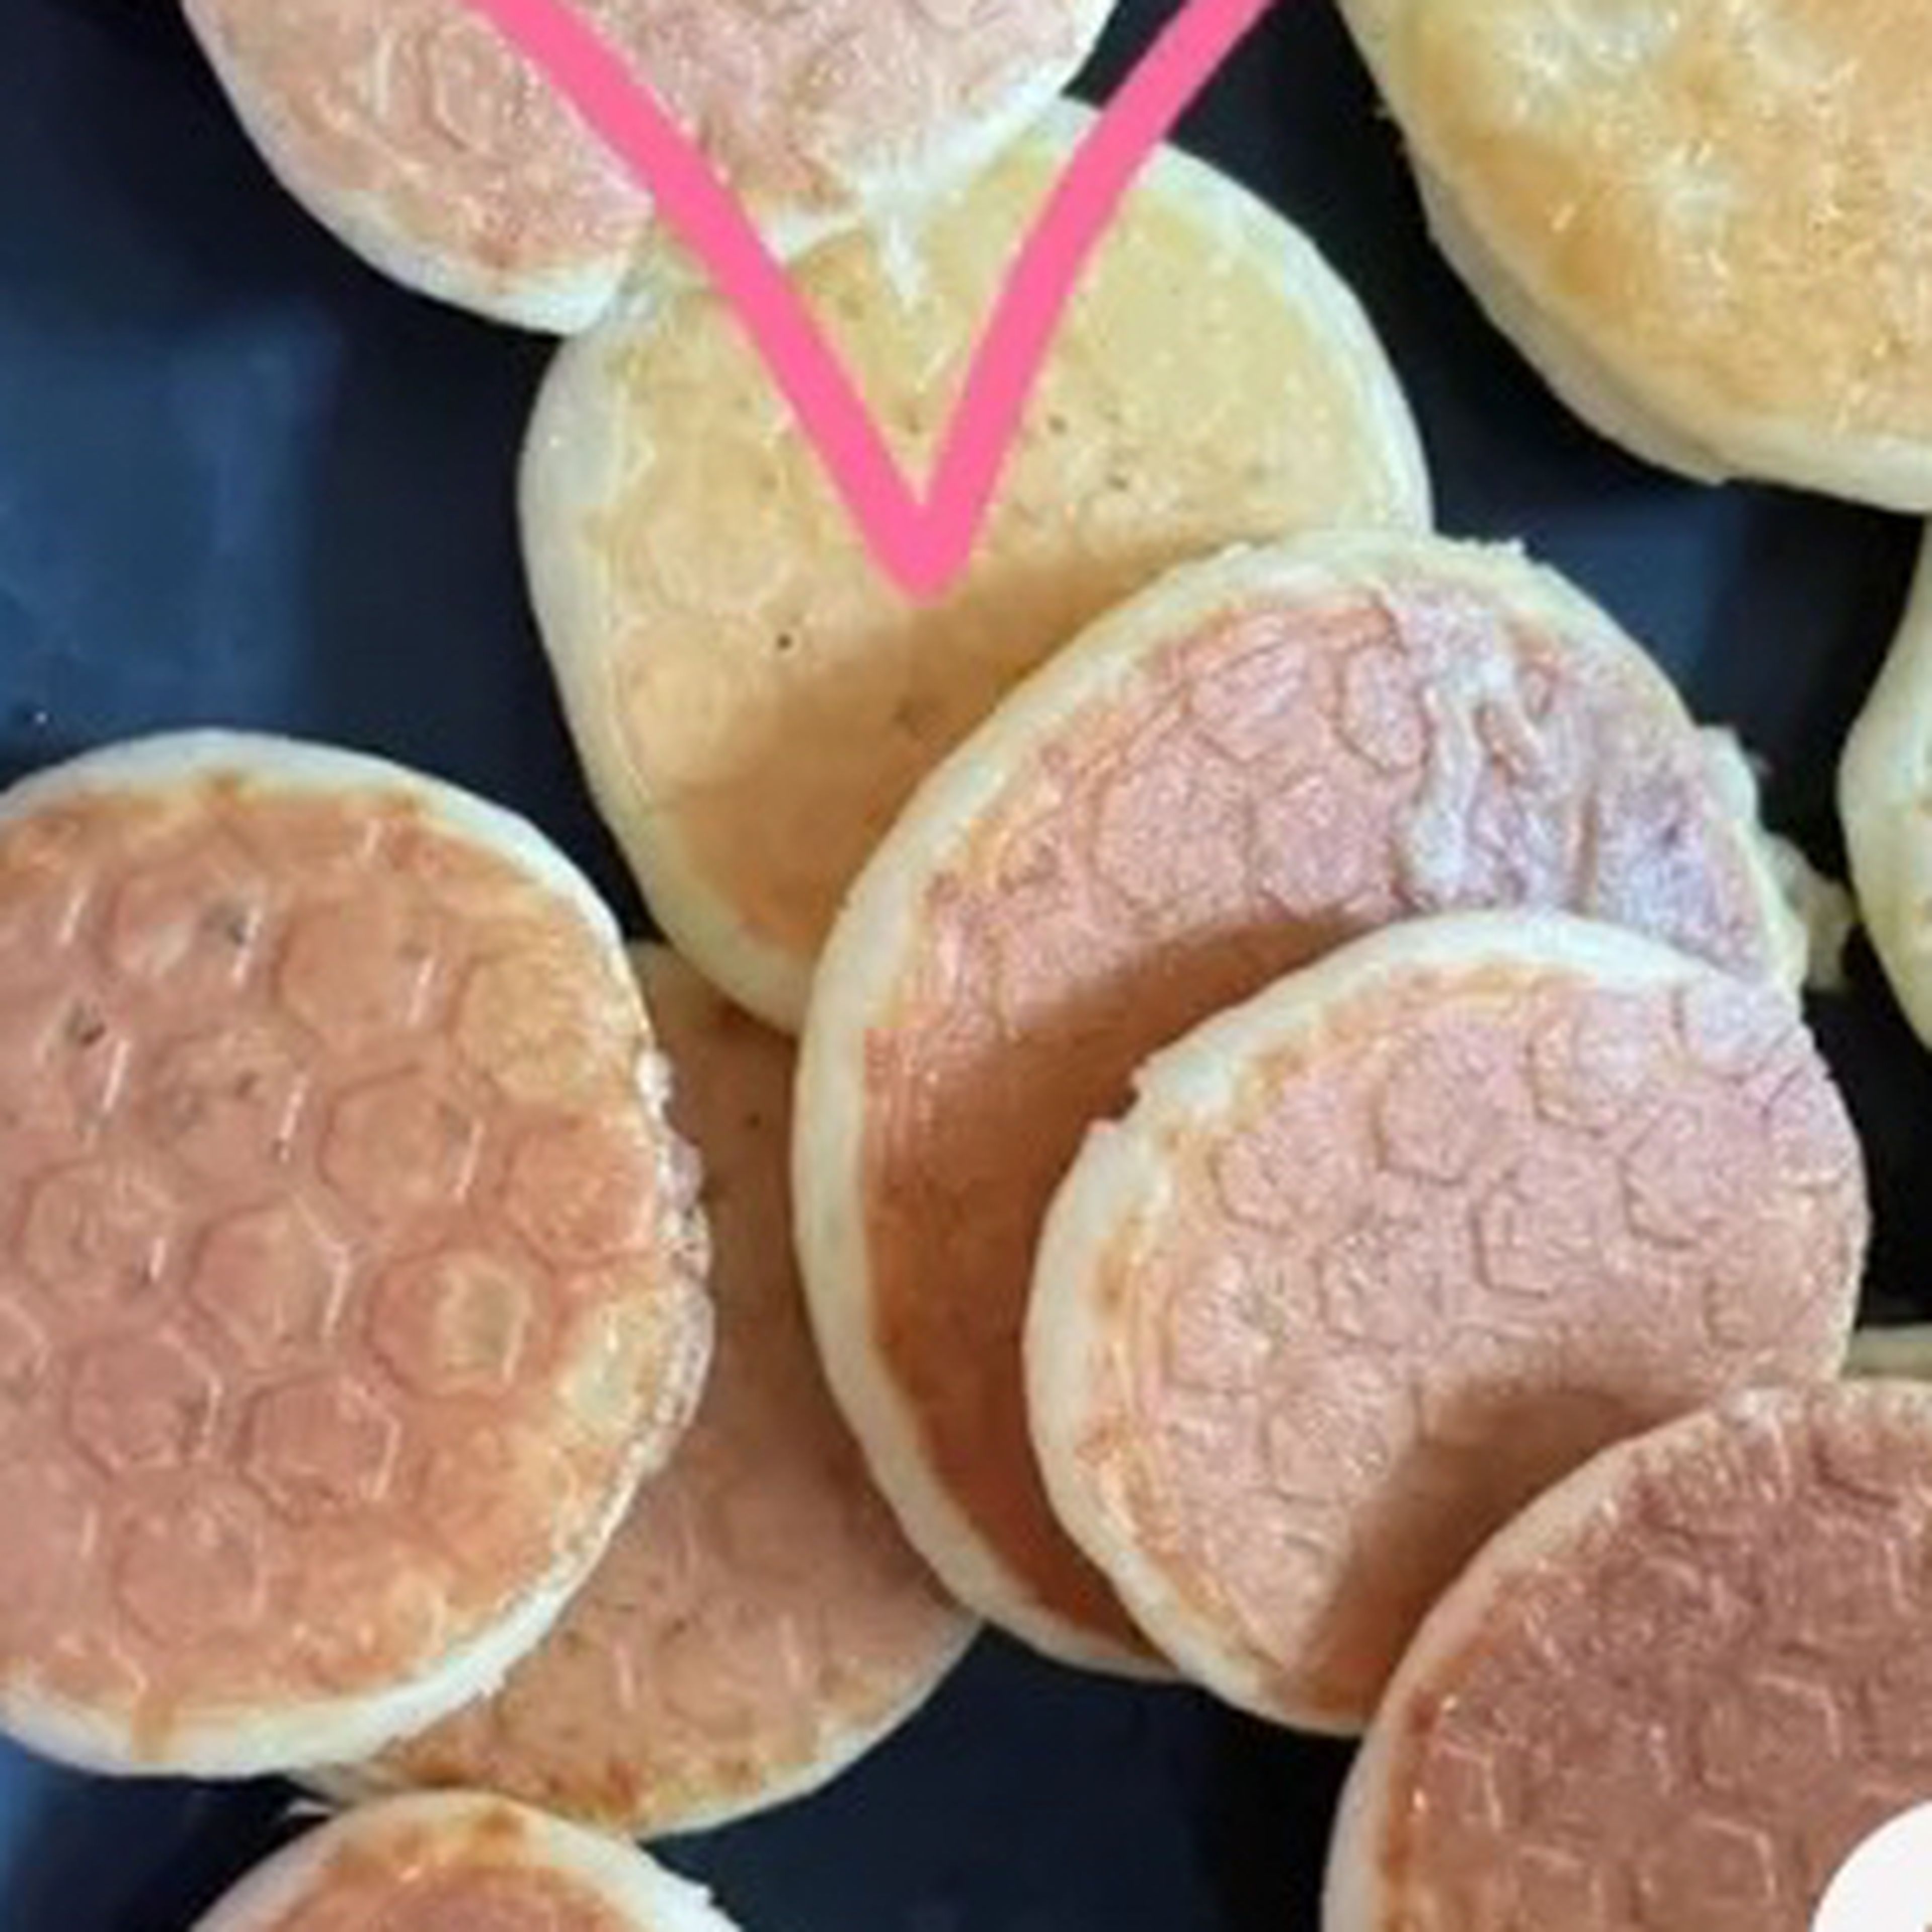 When it all cooling down, put red bean paste inside the pancake, the serve. That was so nice and delicious for toddlers’s afternoon tea too.